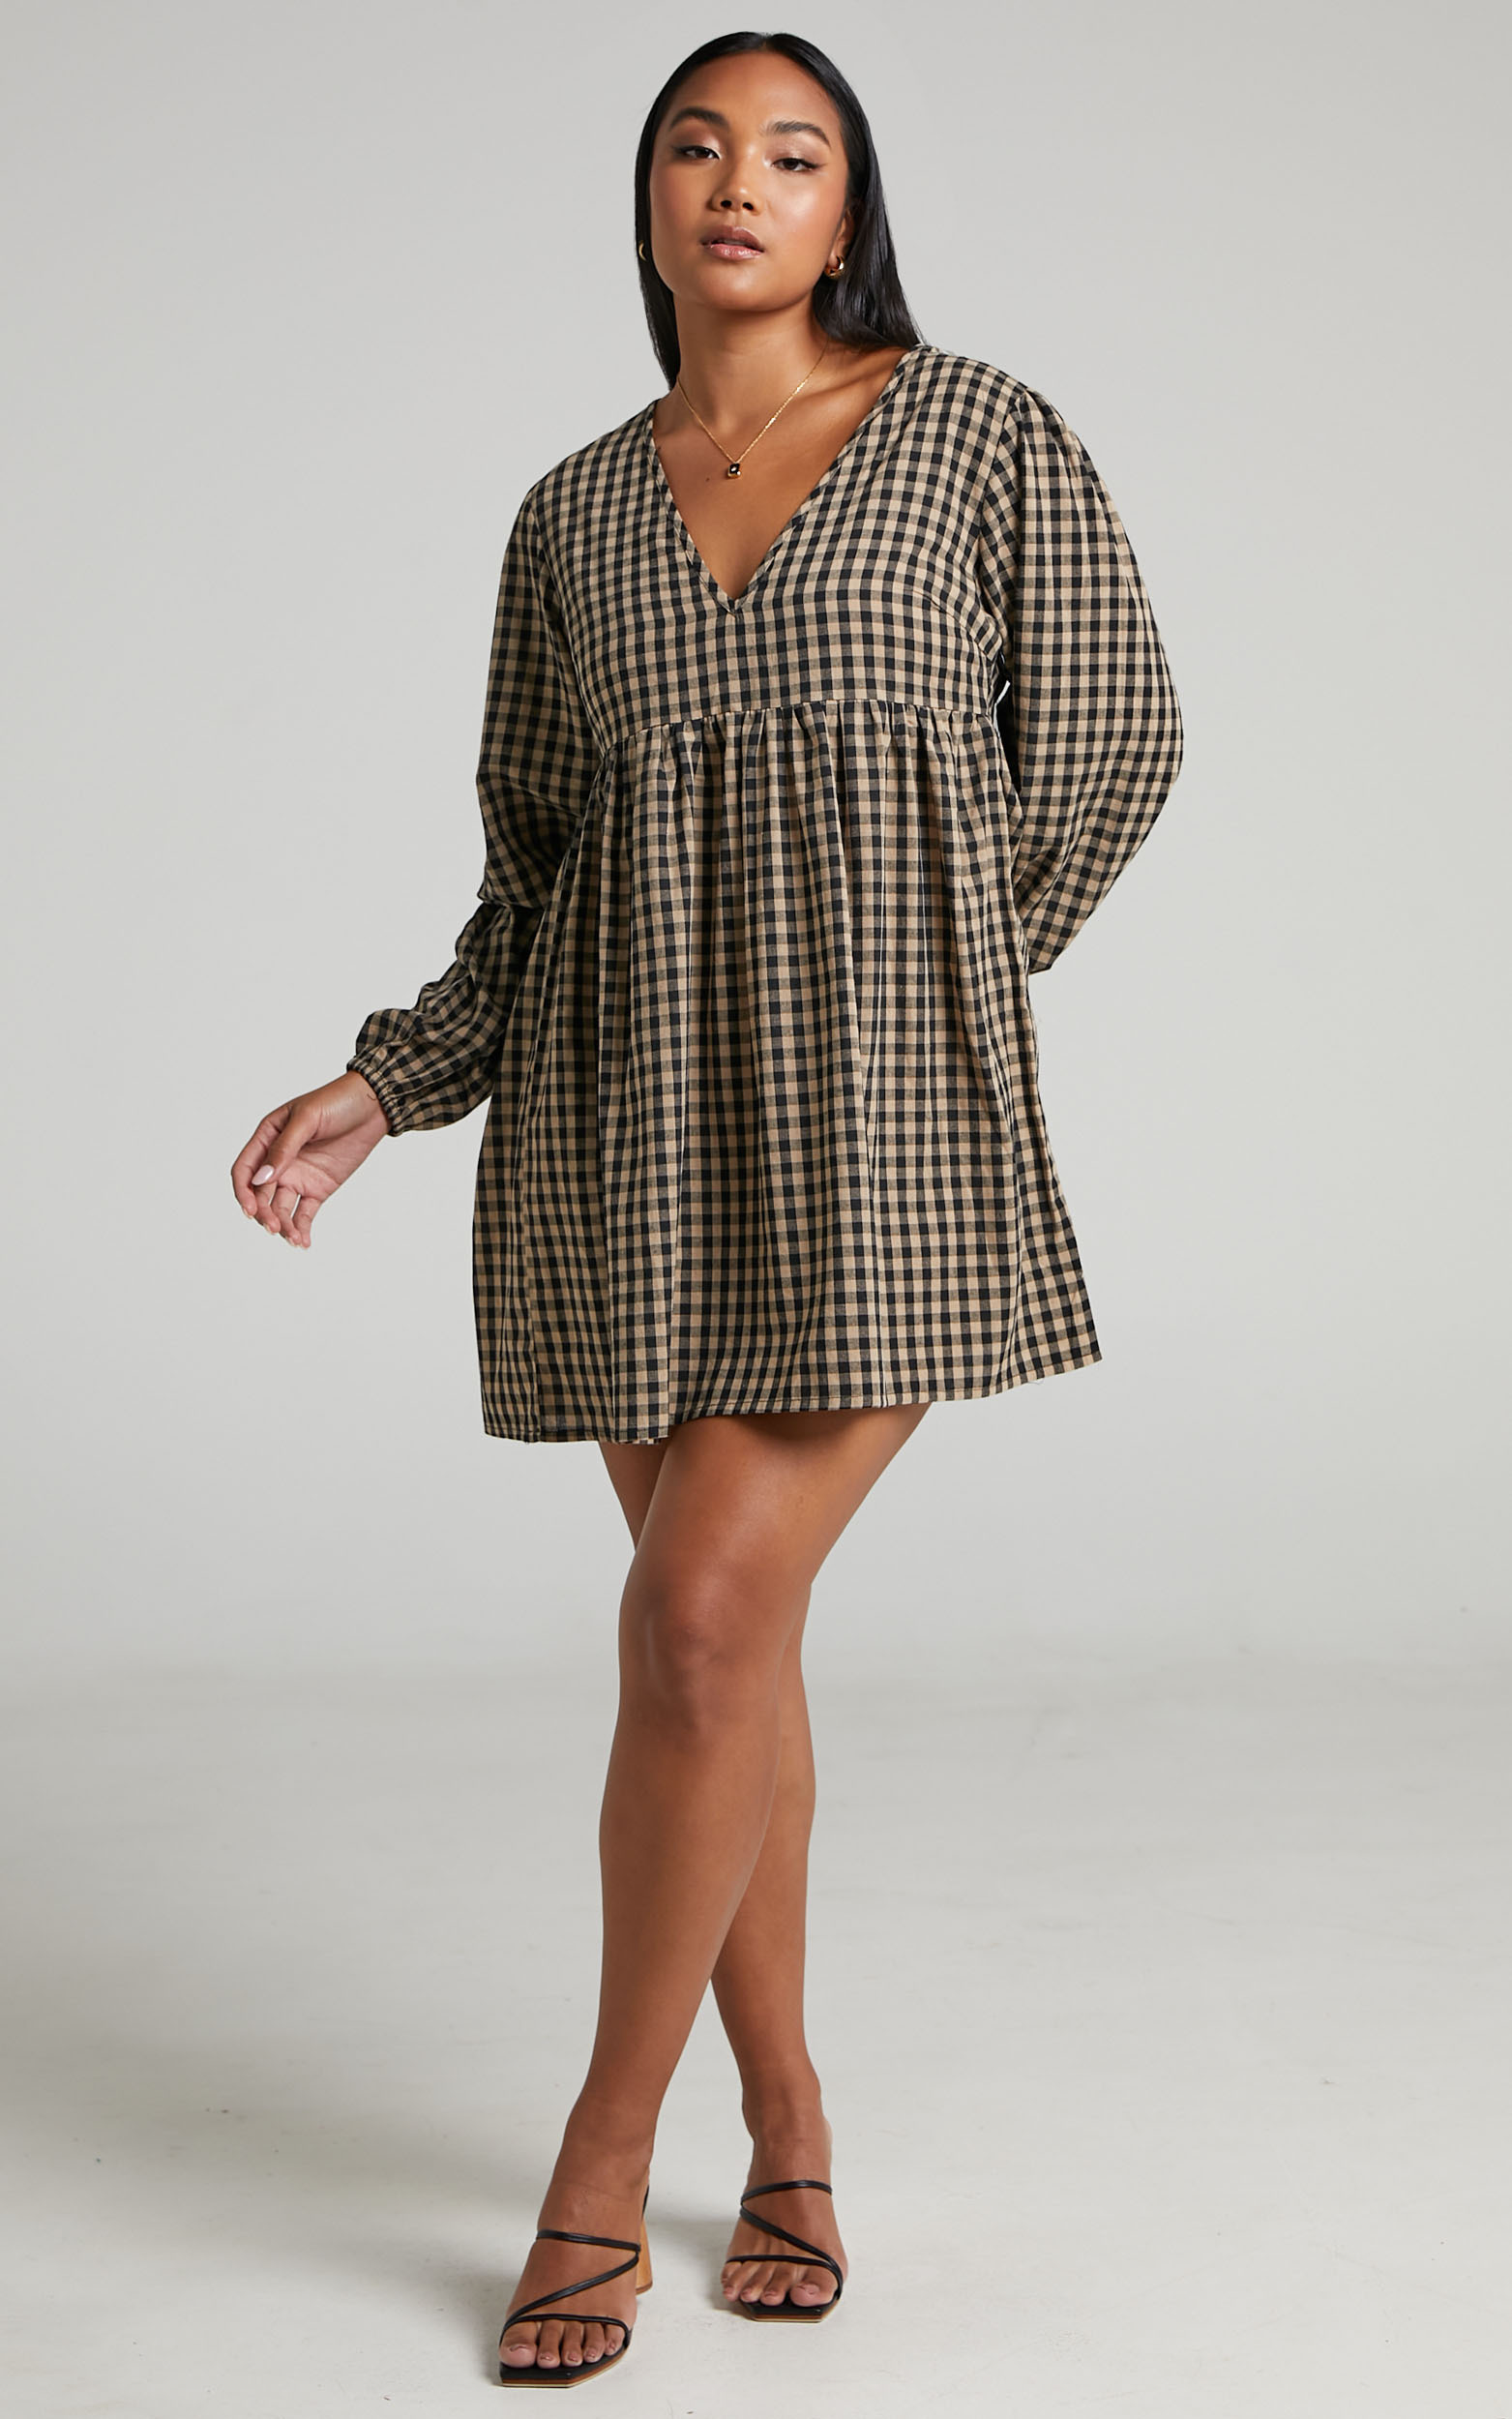 Kamrin Long Sleeve Mini Shift Dress in Gingham - 04, BLK1, hi-res image number null